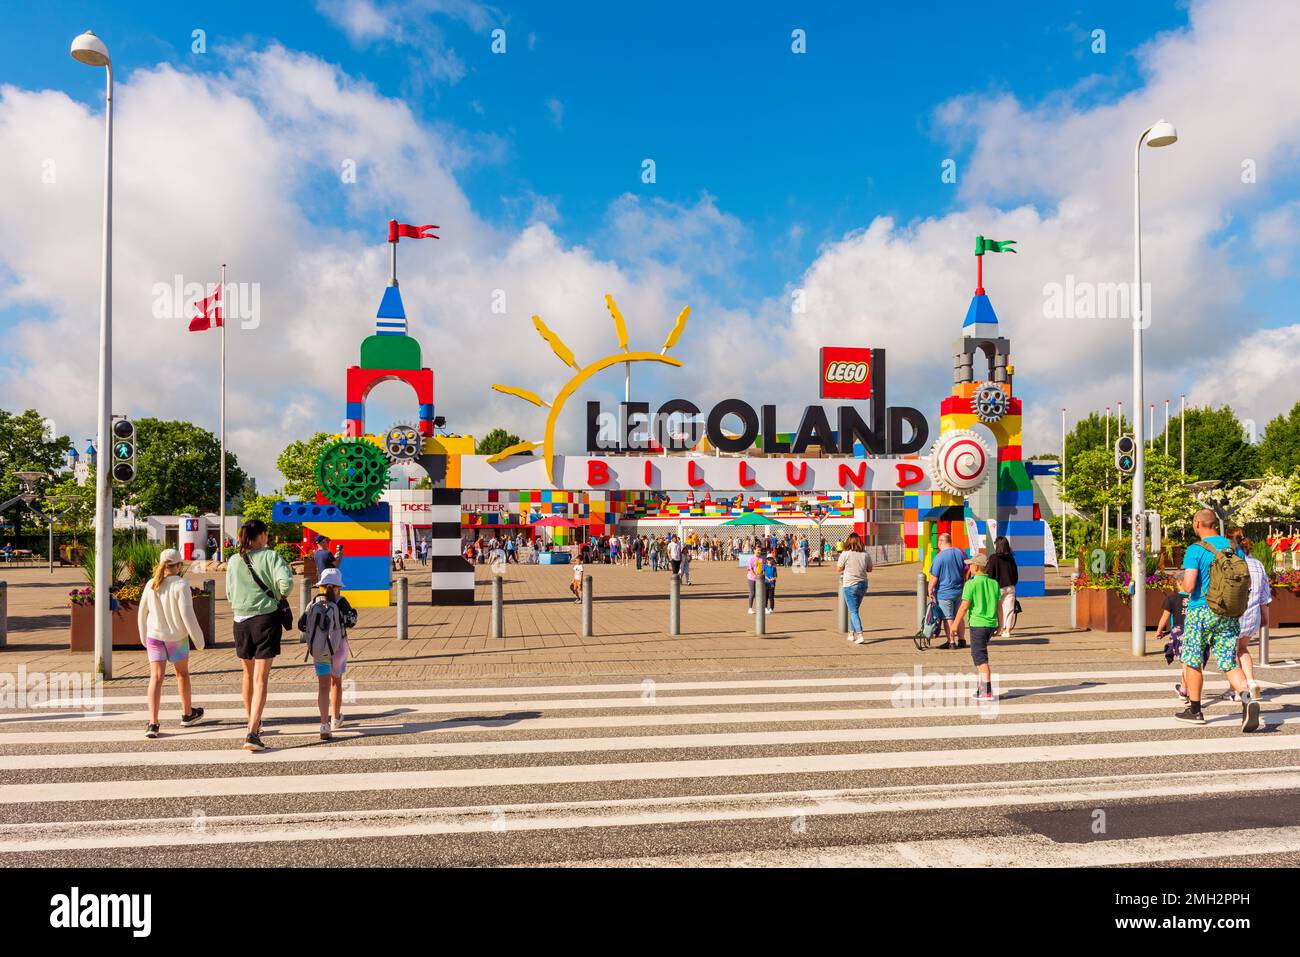 Entrance to Legoland Amsument Park in Billund, Denmark. Legoland opened on 7 June 1968 and attracts about 2 million visitors annually. Stock Photo